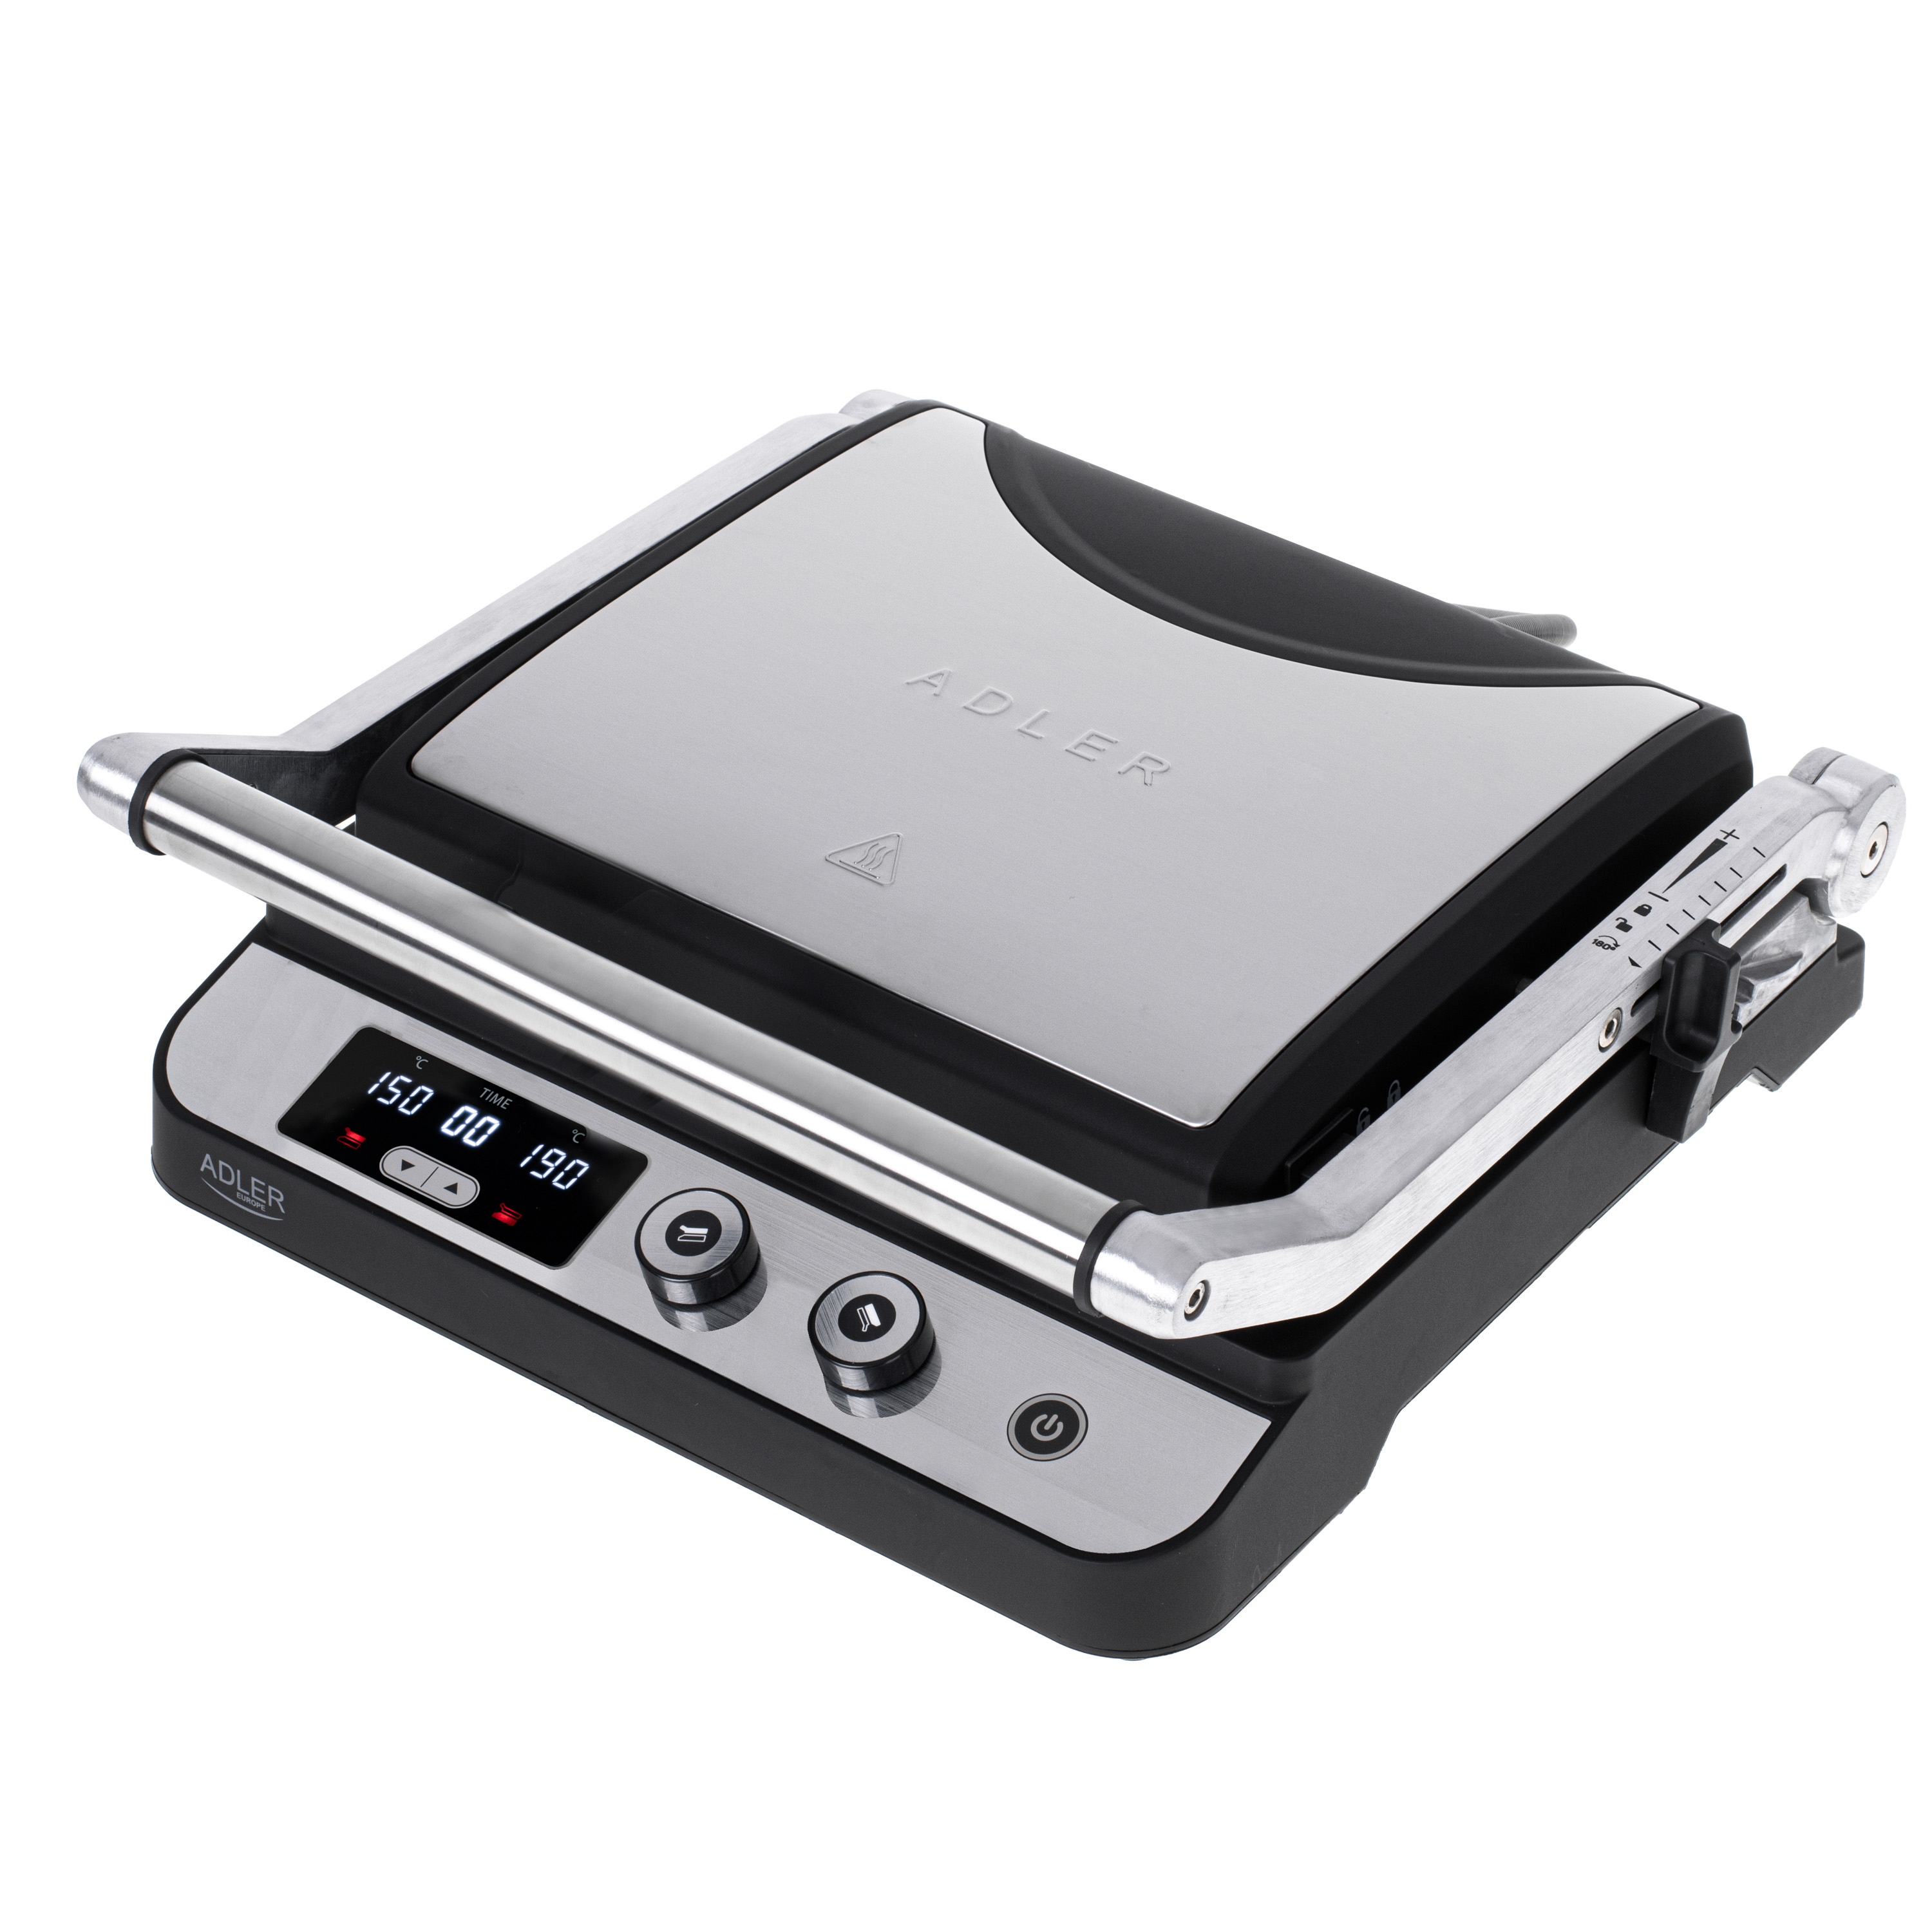 Adler Electric Grill AD 3059 Black/Stainless Steel 5903887807937 AD_3059 (5903887807937)